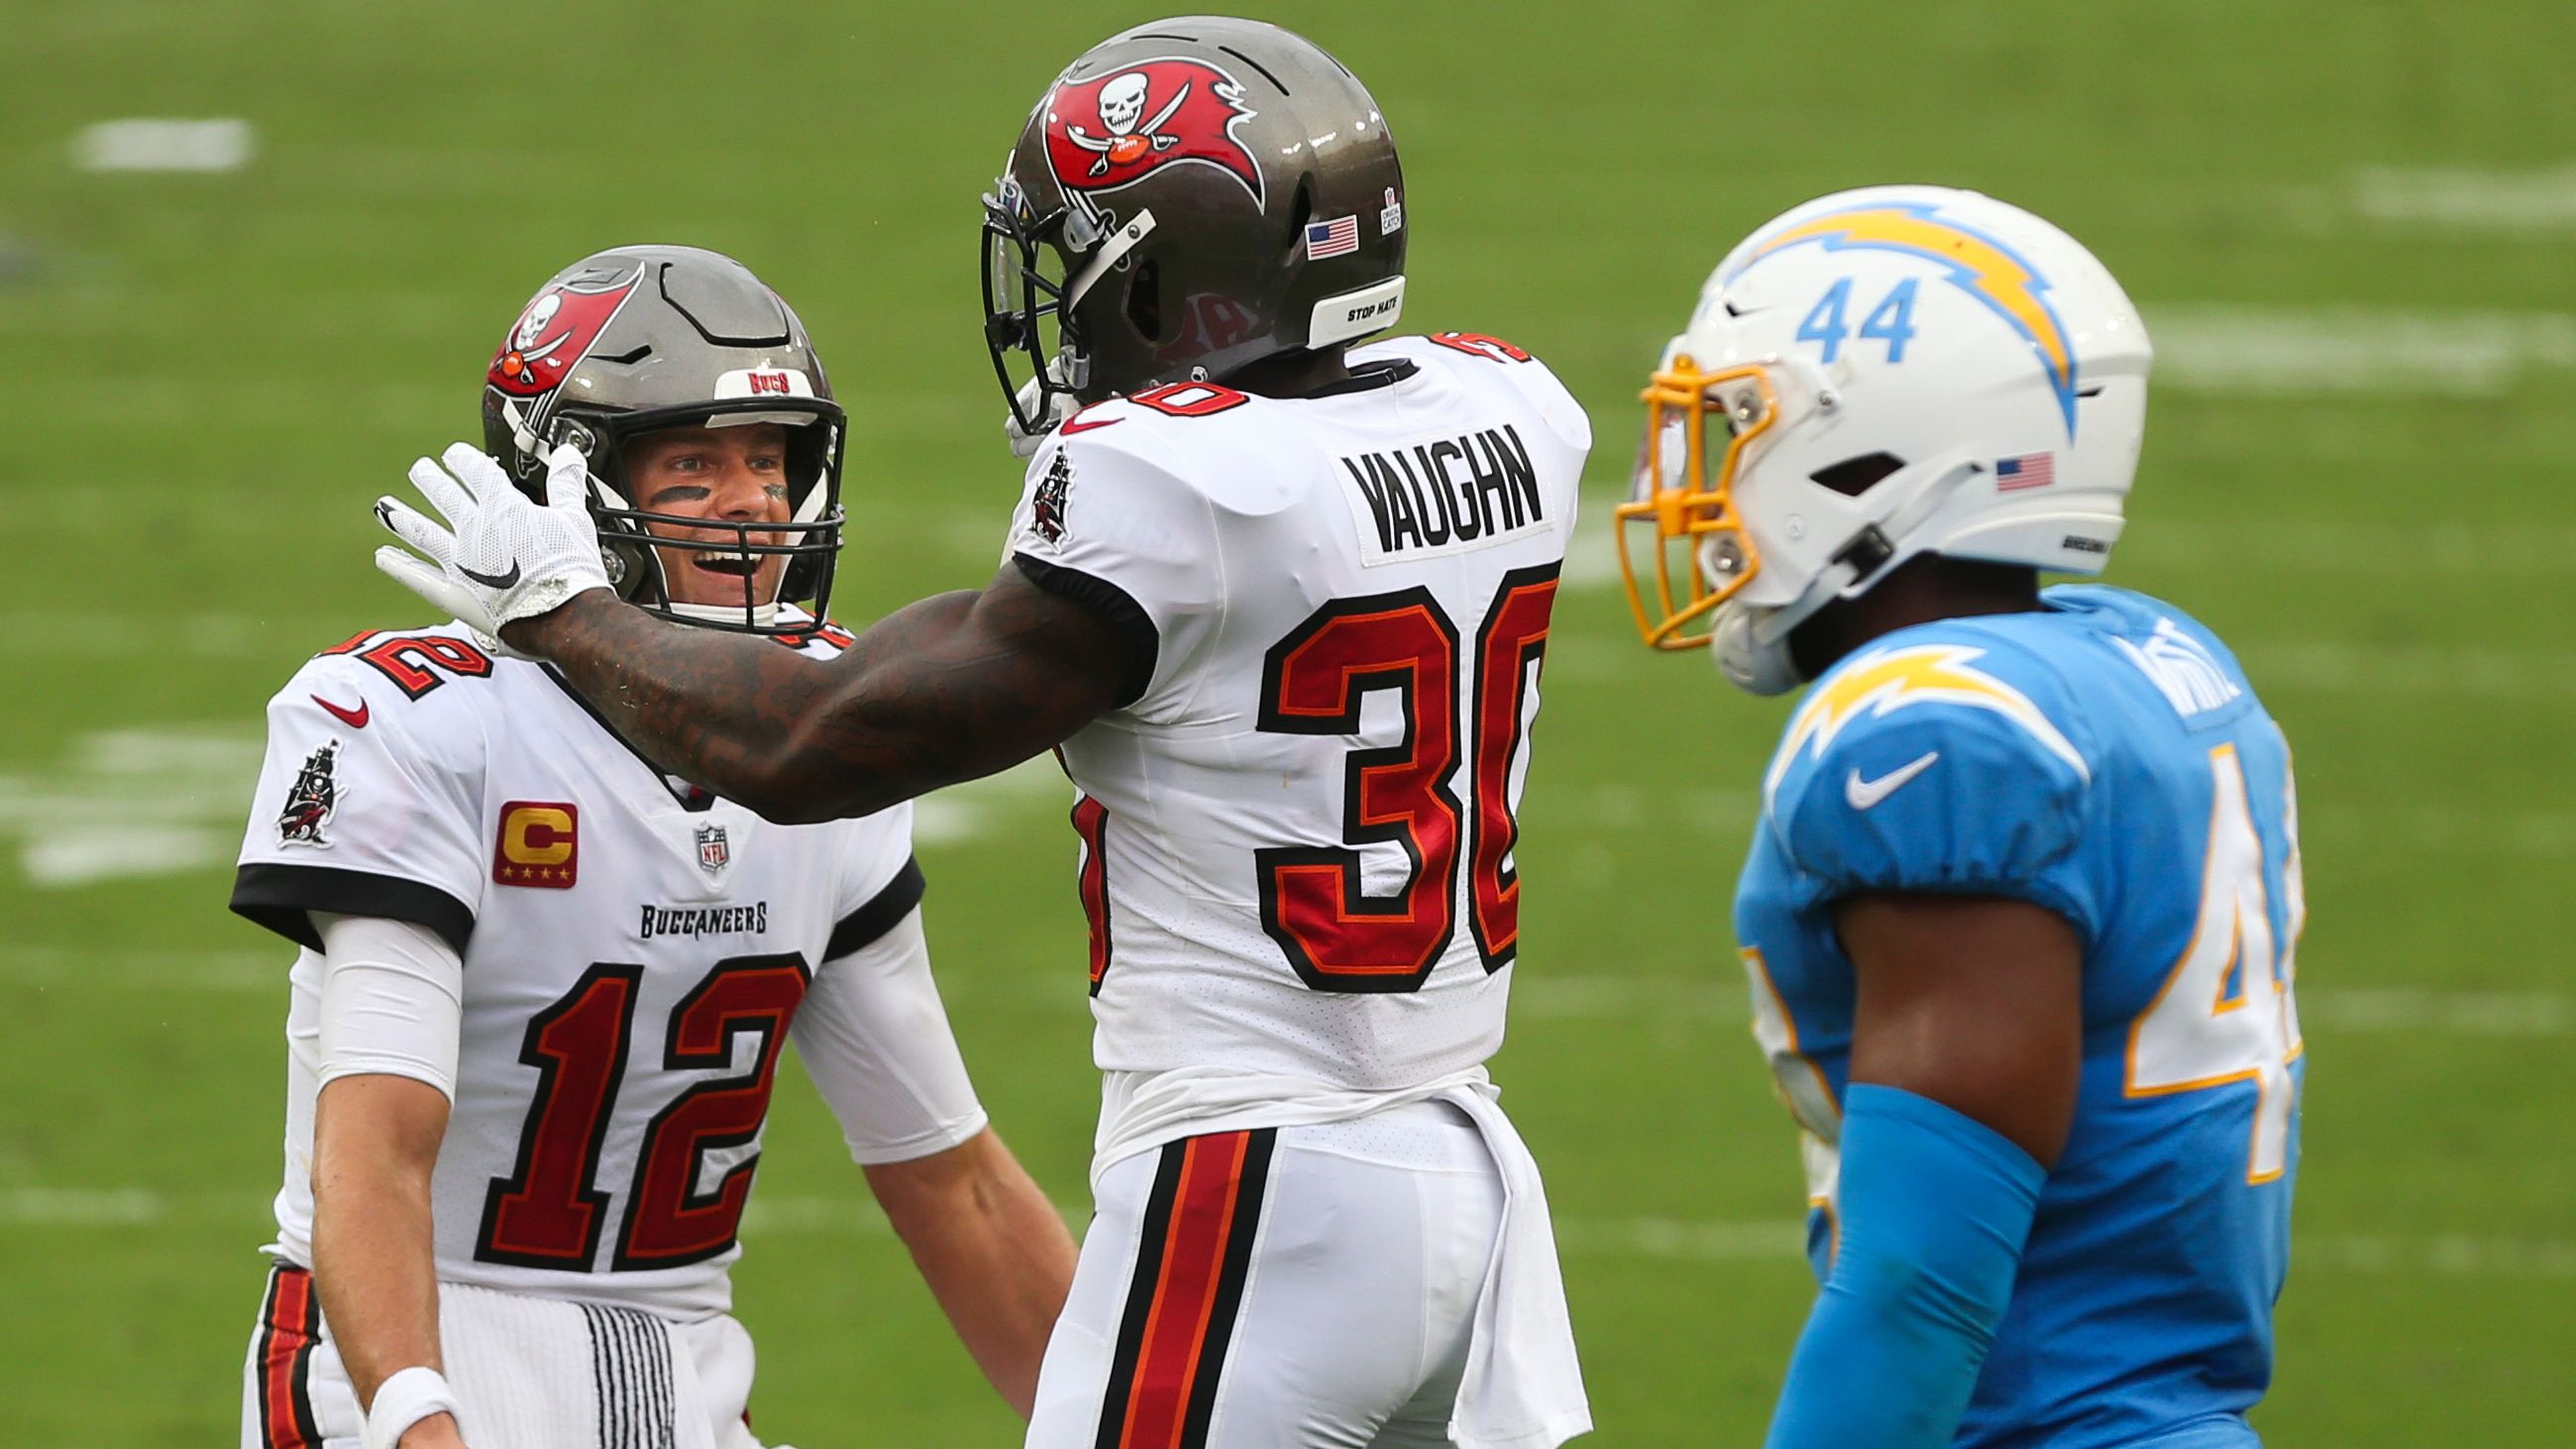 Bucs News: Ke'Shawn Vaughn has unexcused absence at Wednesday practice